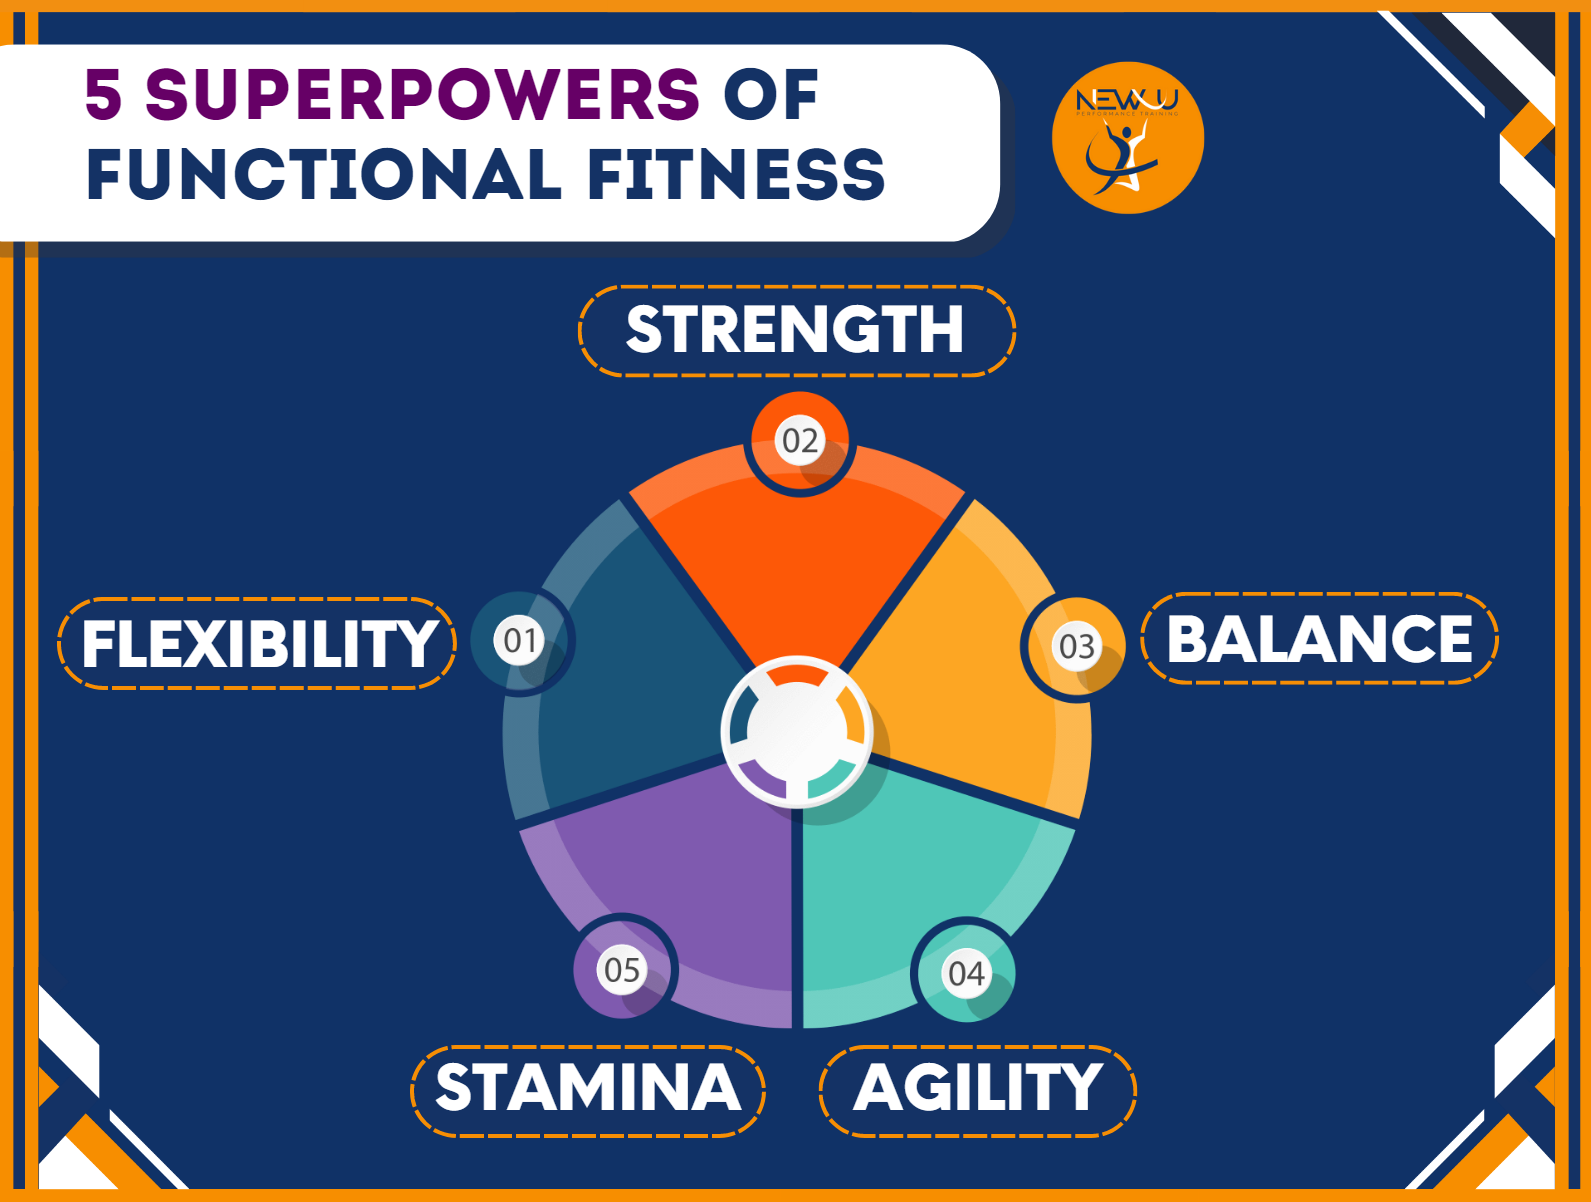 5 superpowers of Functional Fitness Training